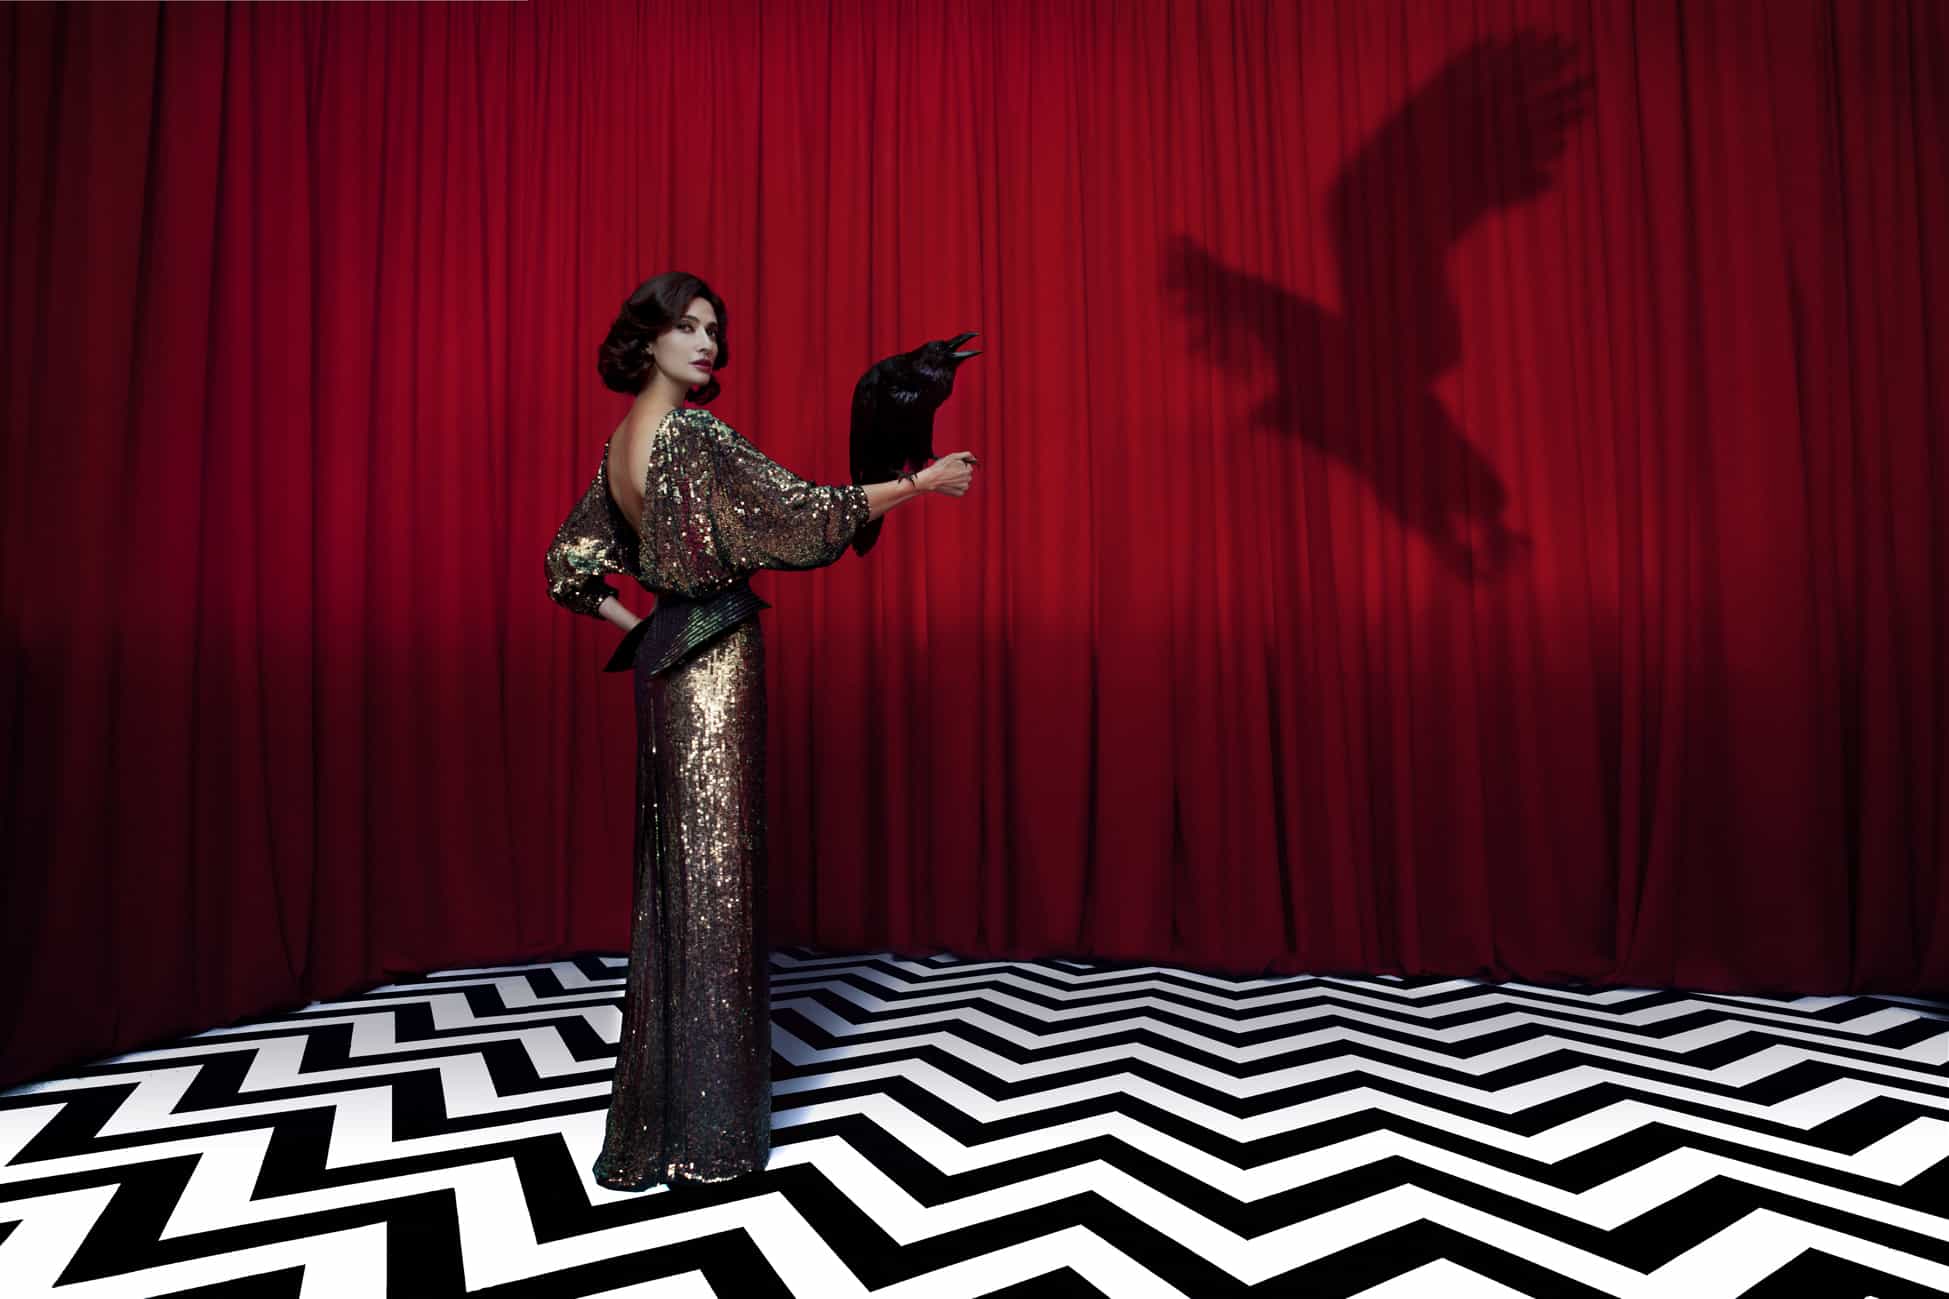 Twin Peaks continues to inspire photo shoots, the most recent being the Red...